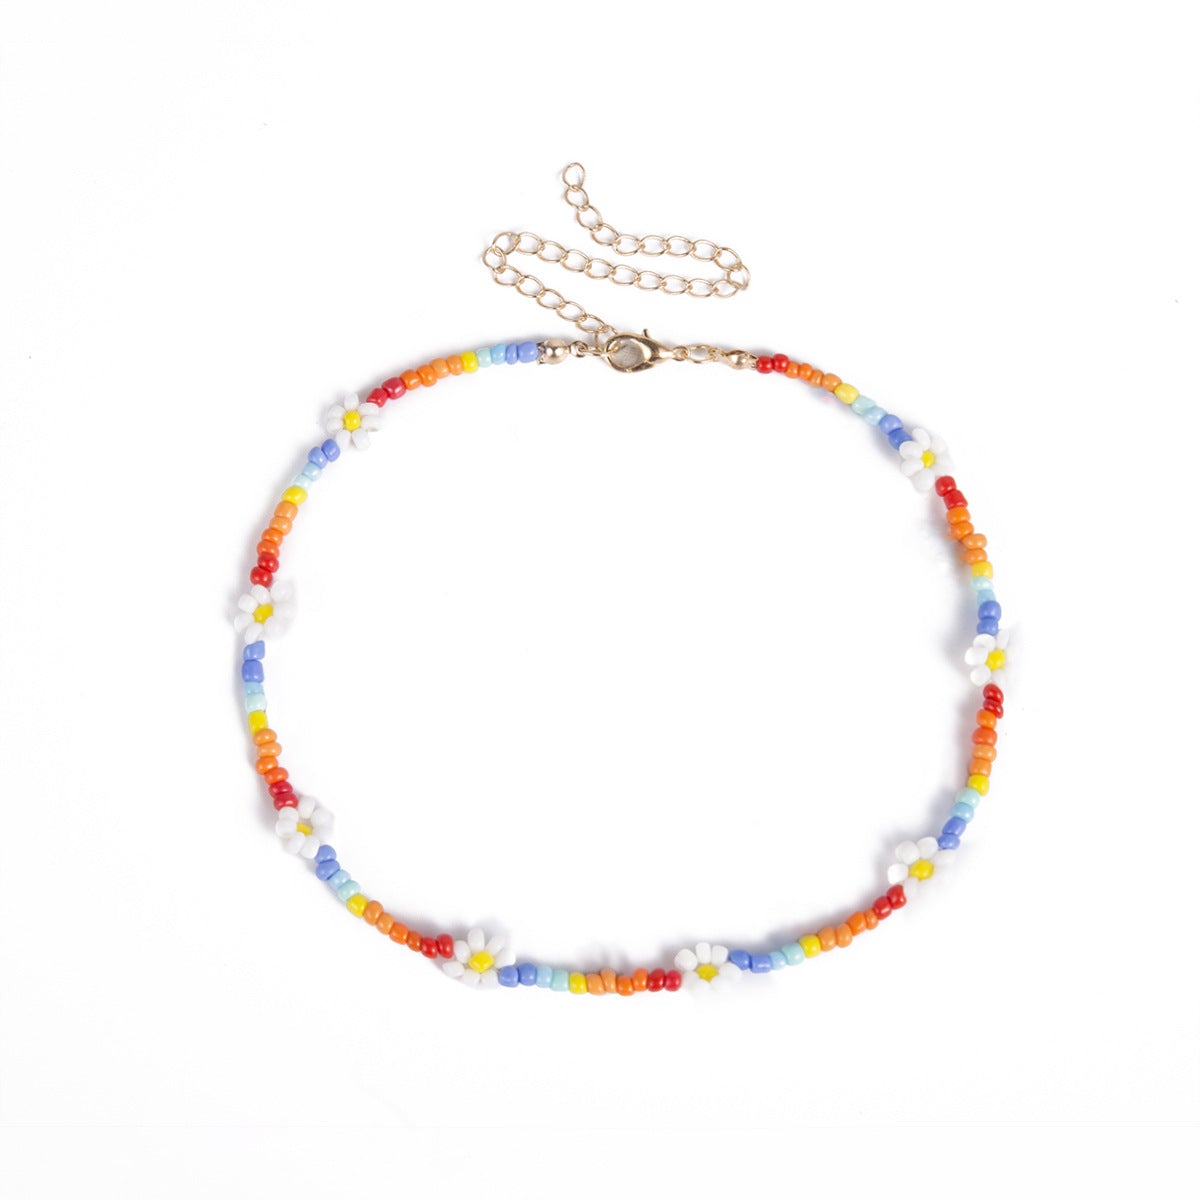 Handmade Colorful Beads String Daisy Design Necklaces for Women-Necklaces-JEWELRYSHEOWN